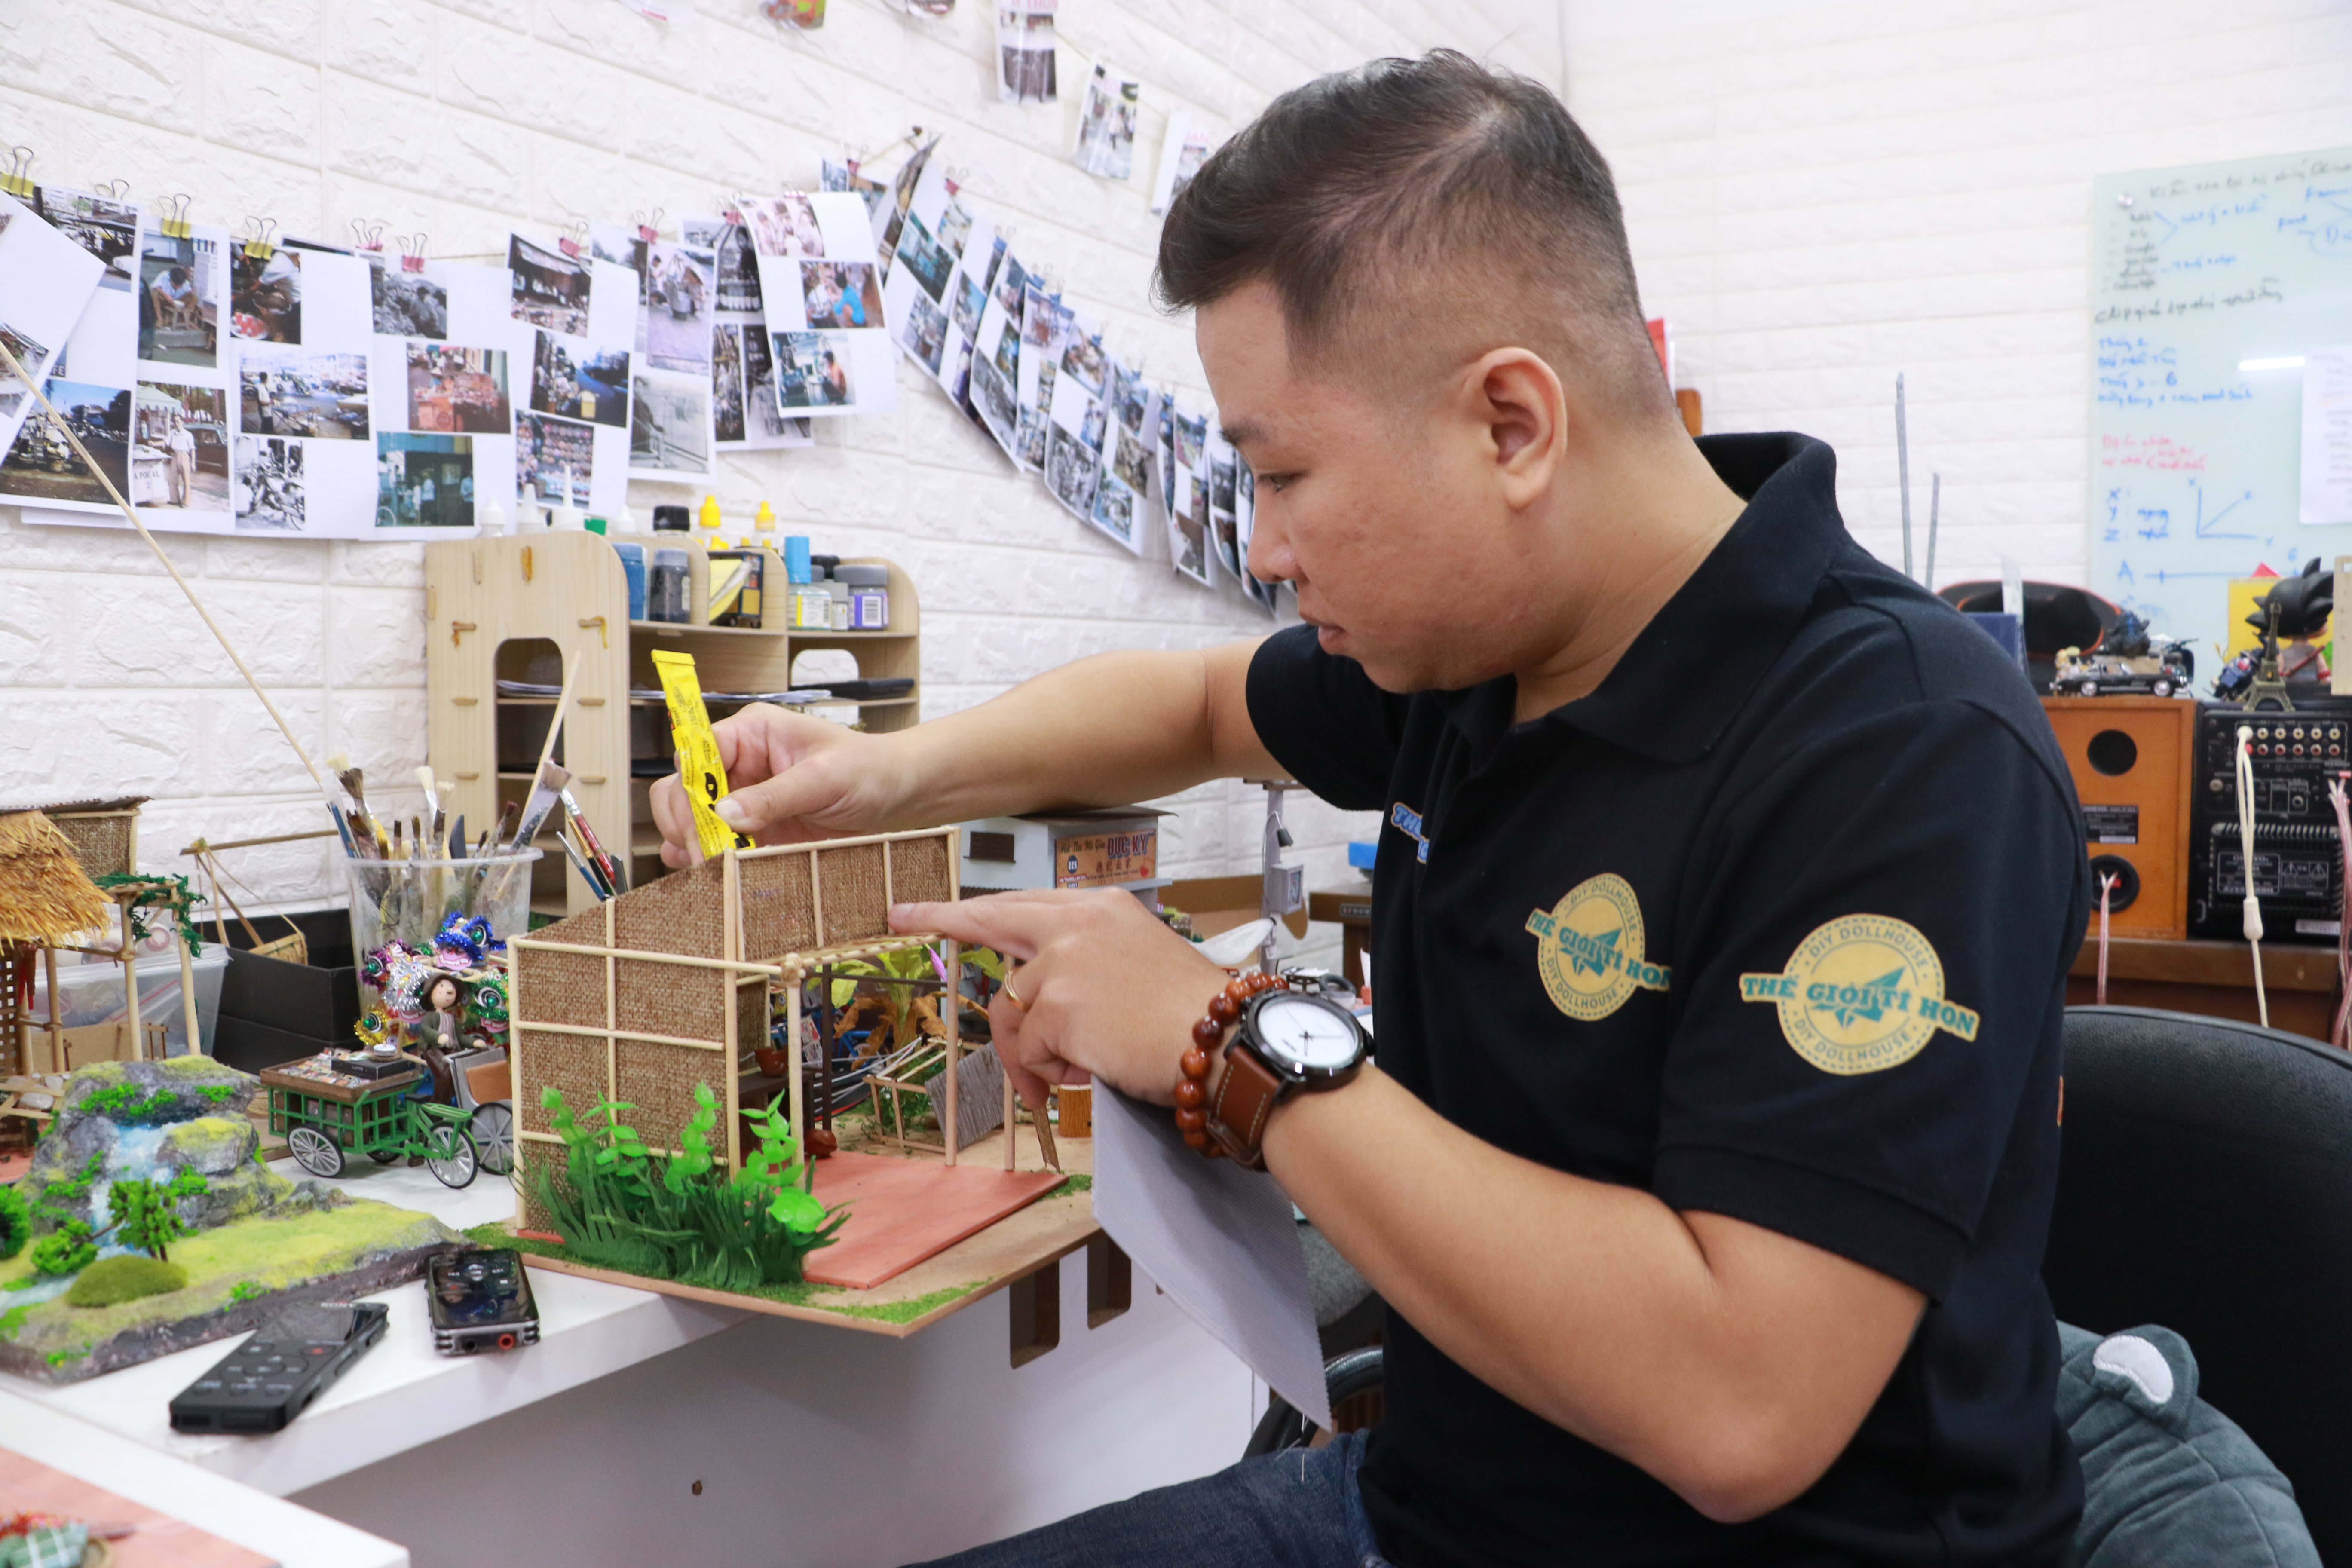 Nguyen Phuc Duc is seen working on a new product featuring a house in the countryside of the Mekong Delta region in Vietnam. Photo: Binh Minh/Tuoi Tre